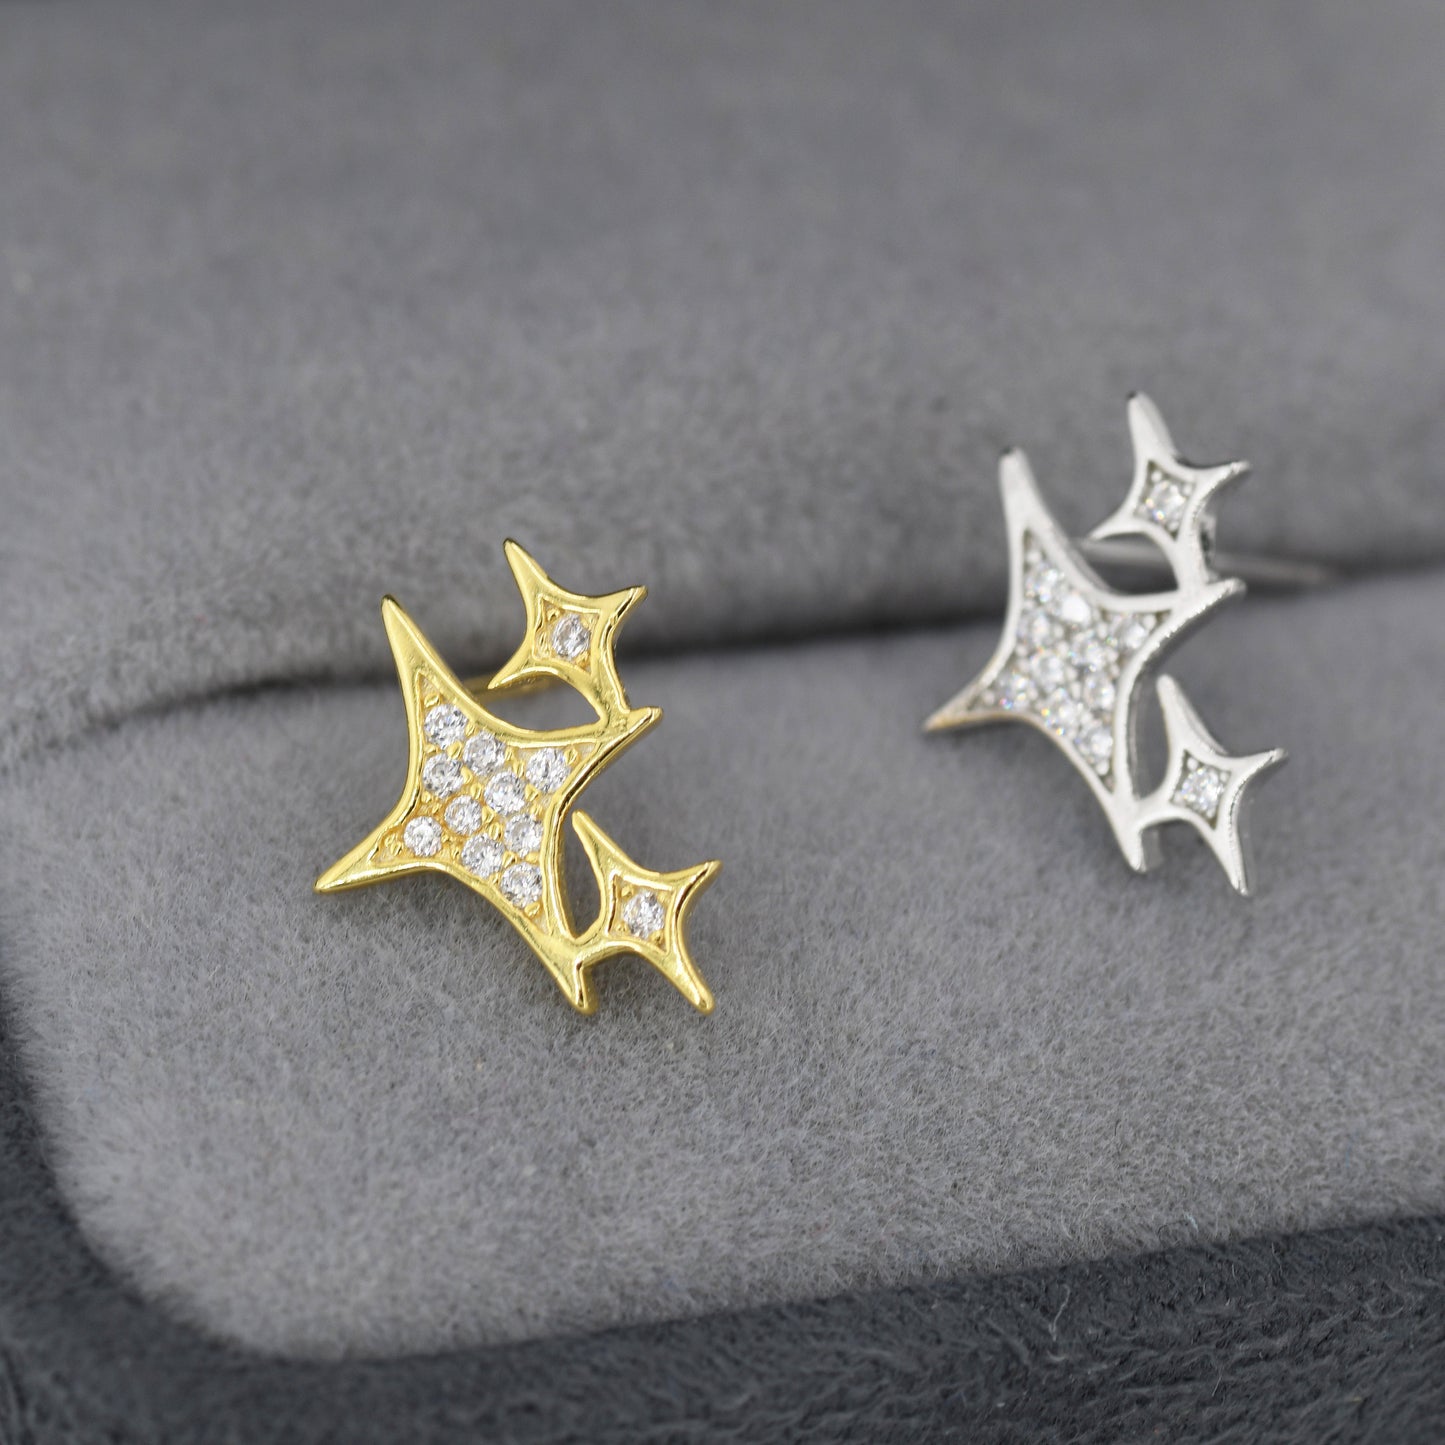 Sparkly Stars CZ Stud Earrings in Sterling Silver, Four Point Star Earrings, Silver or Gold, Three Star Earrings, Celestial Earrings